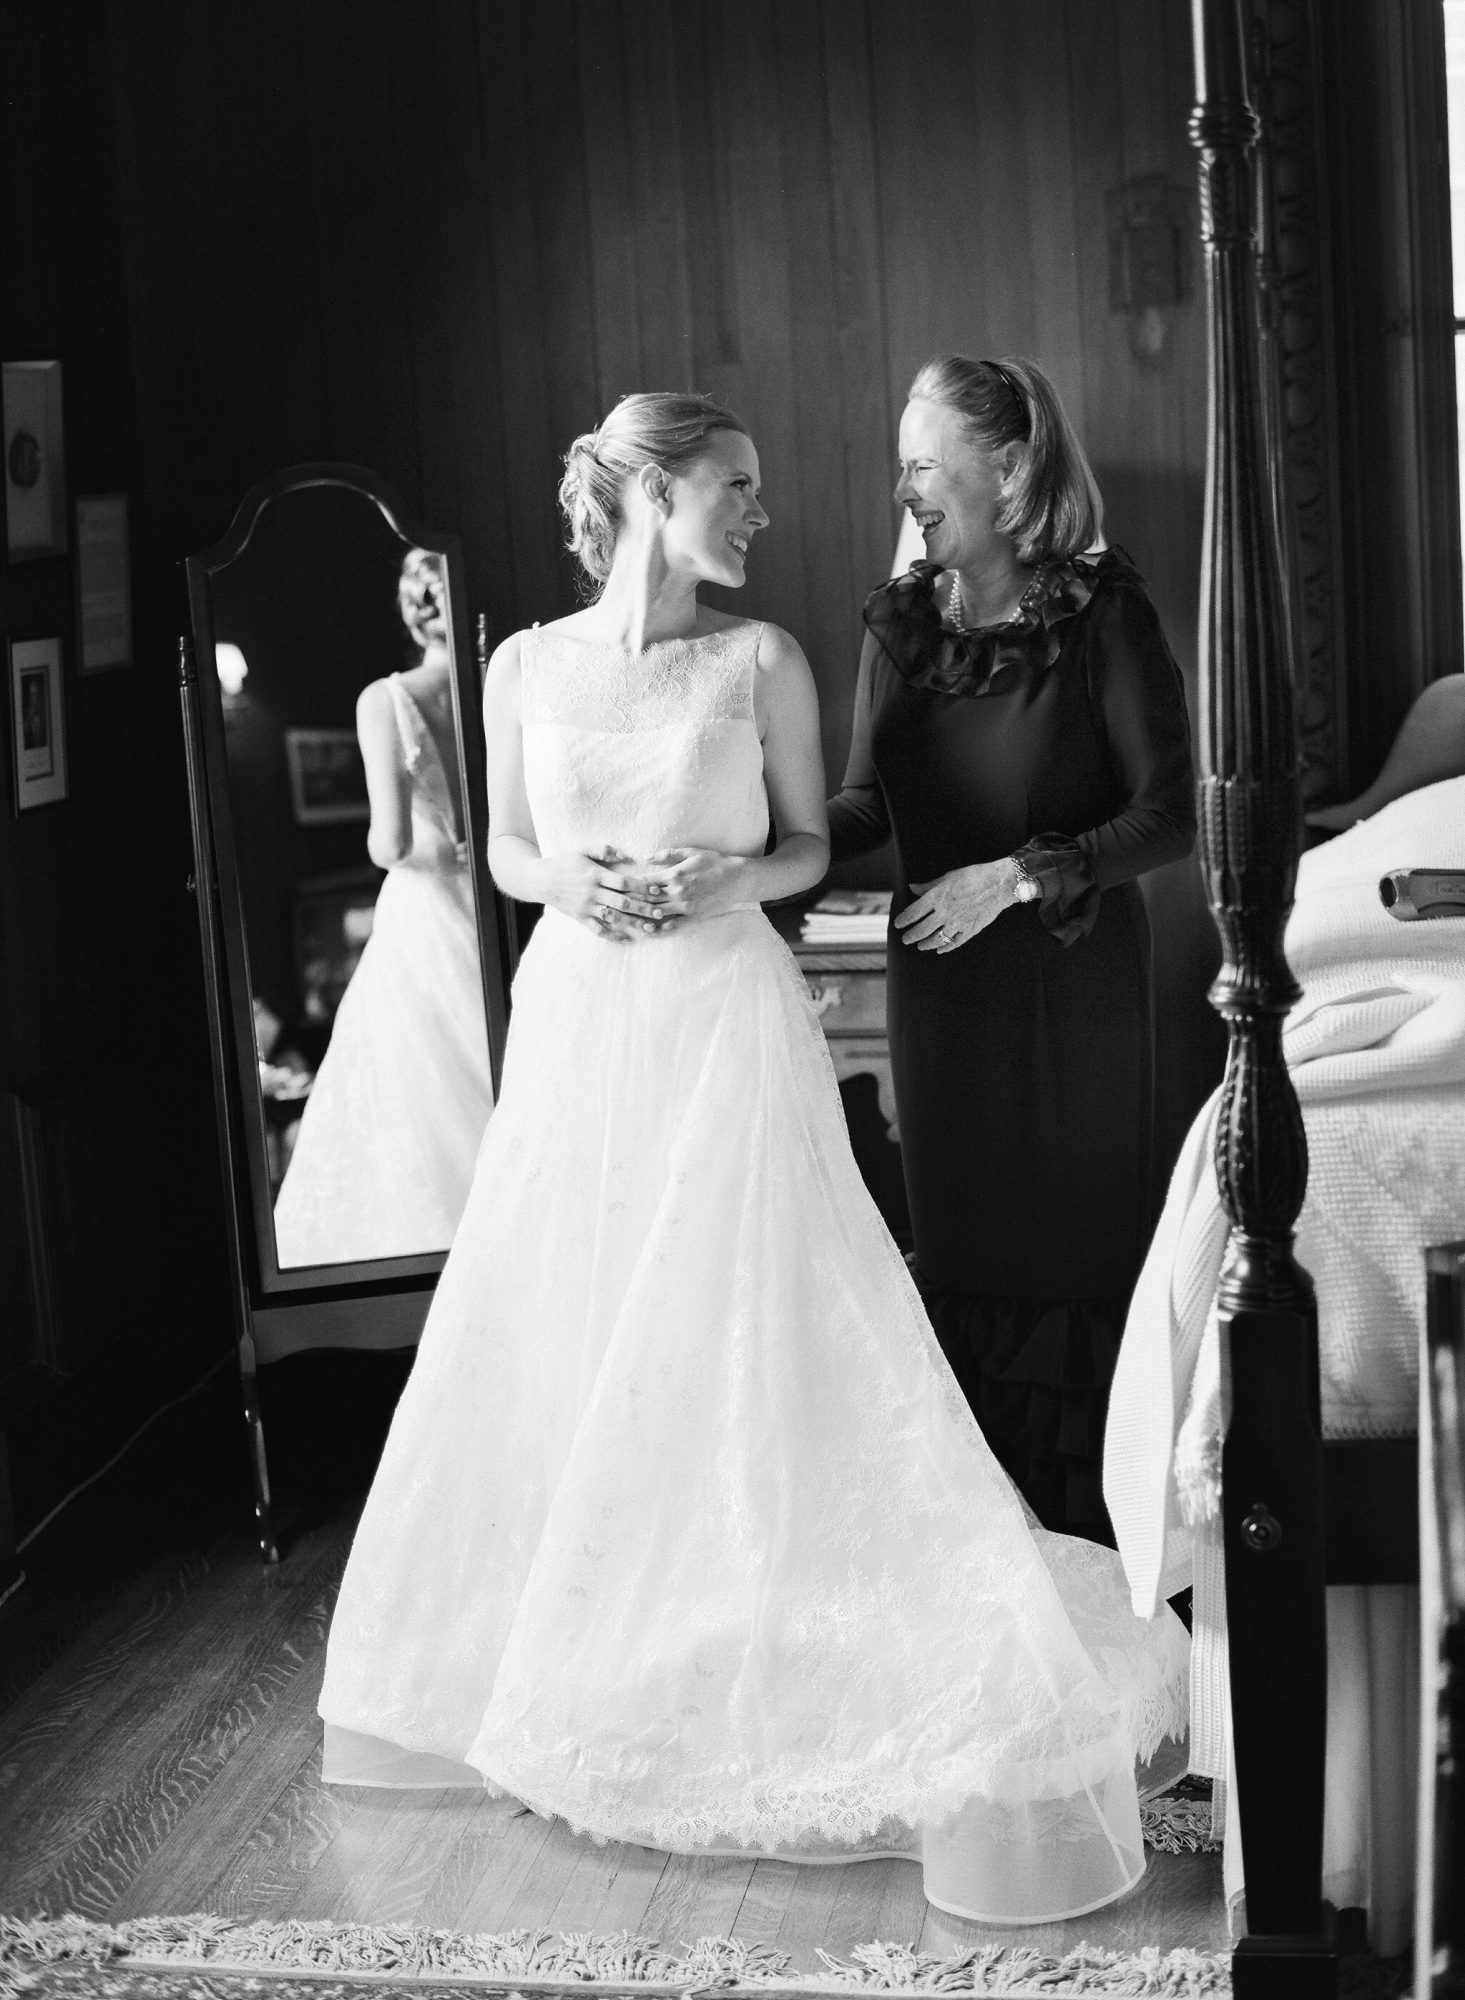 A Mother and Daughter Laughing Before a Wedding